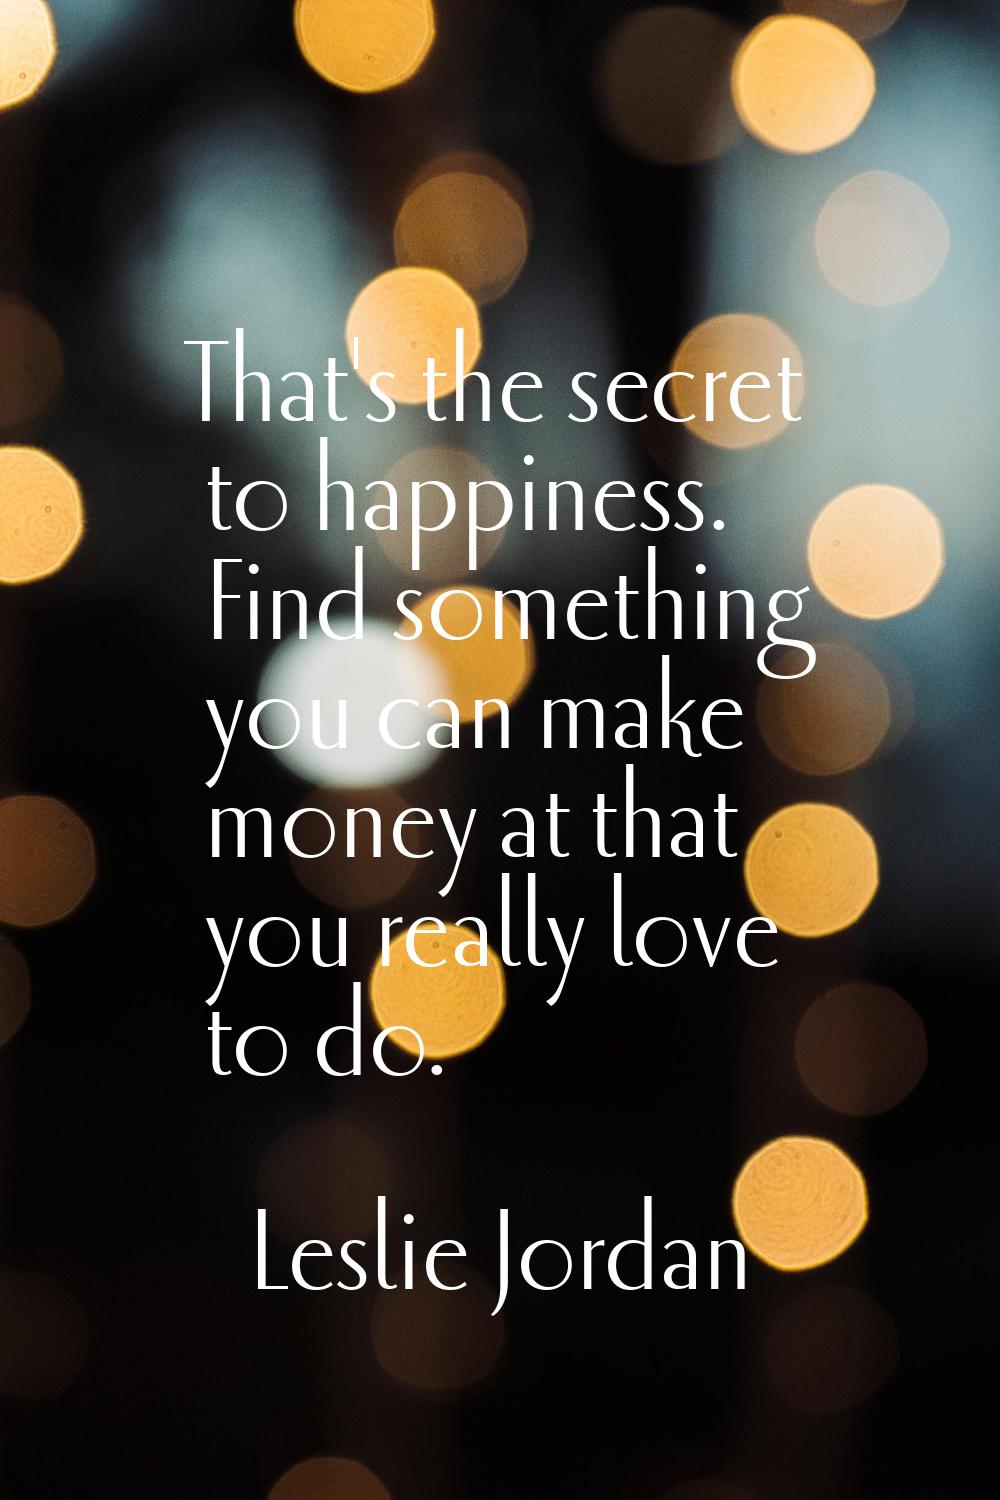 That's the secret to happiness. Find something you can make money at that you really love to do.